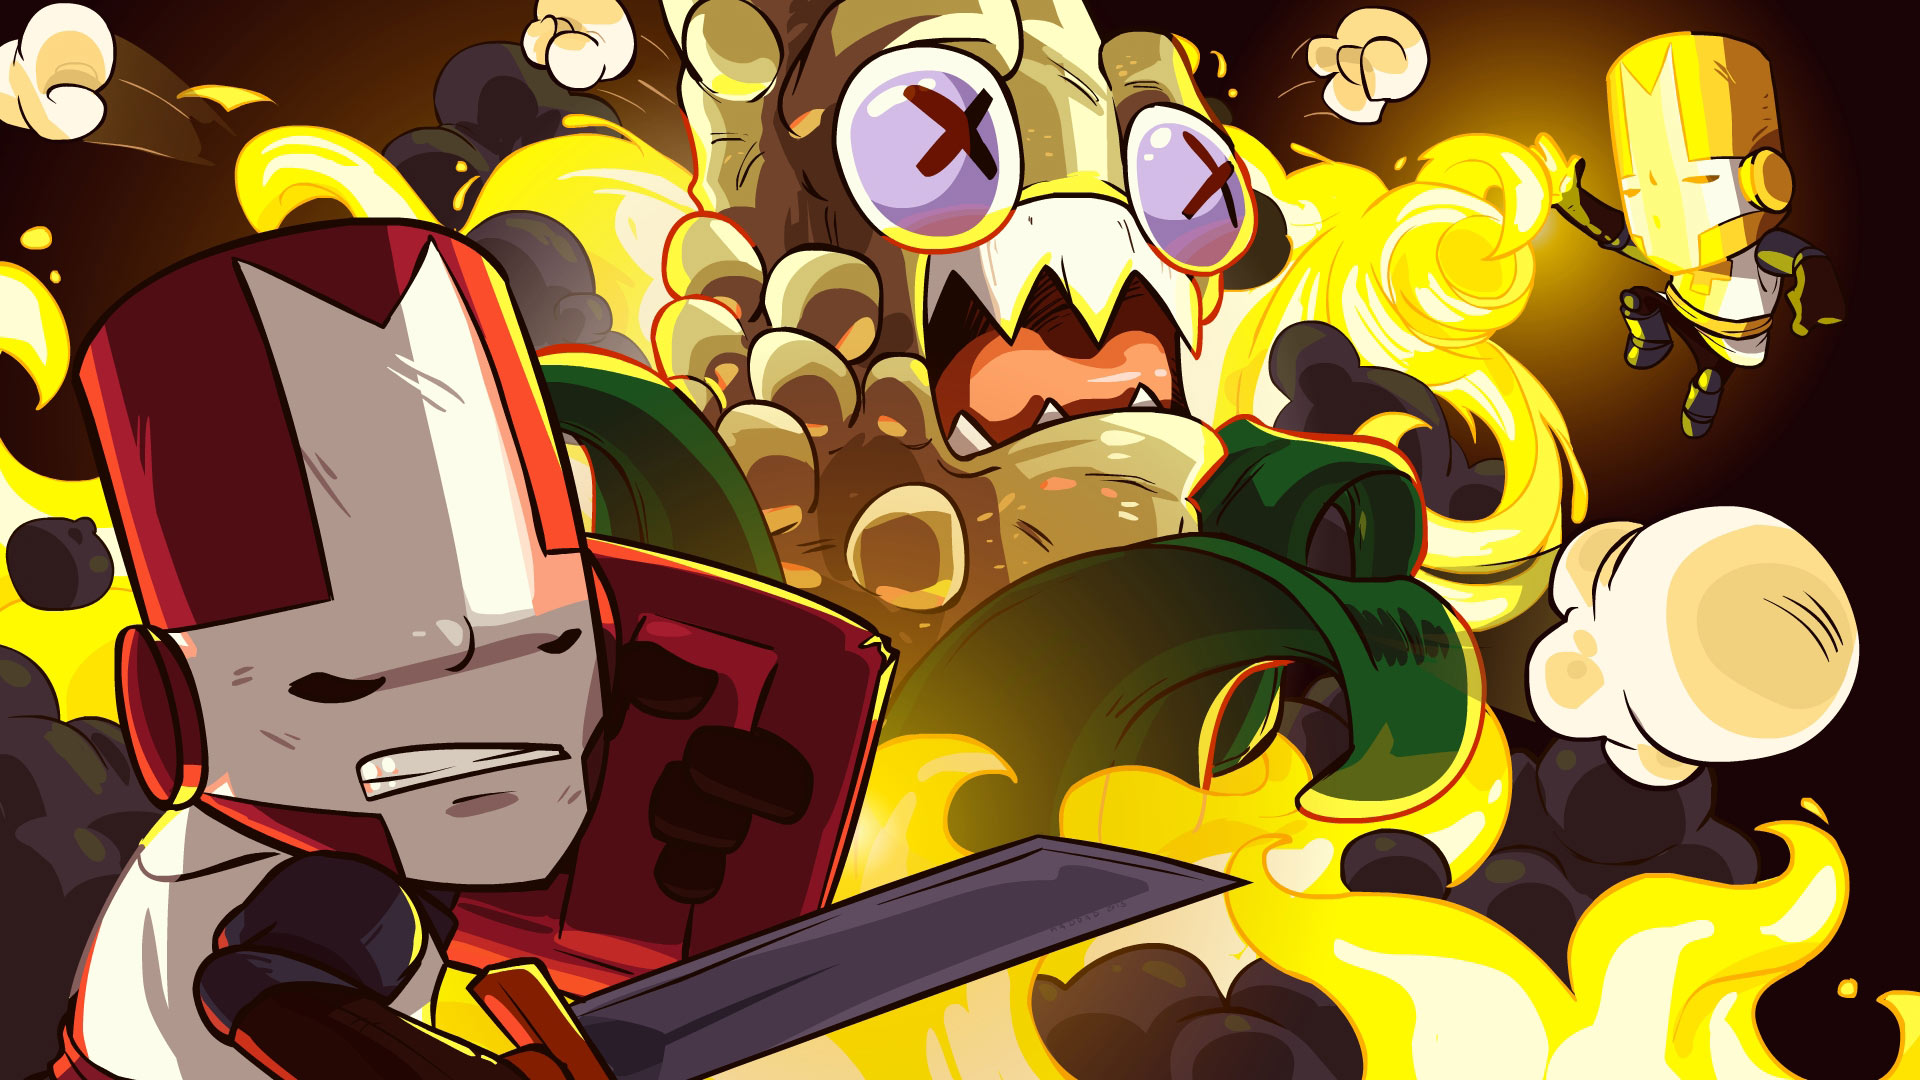 Castle Crashers release date announced. Steam's walls shudder in  anticipation.